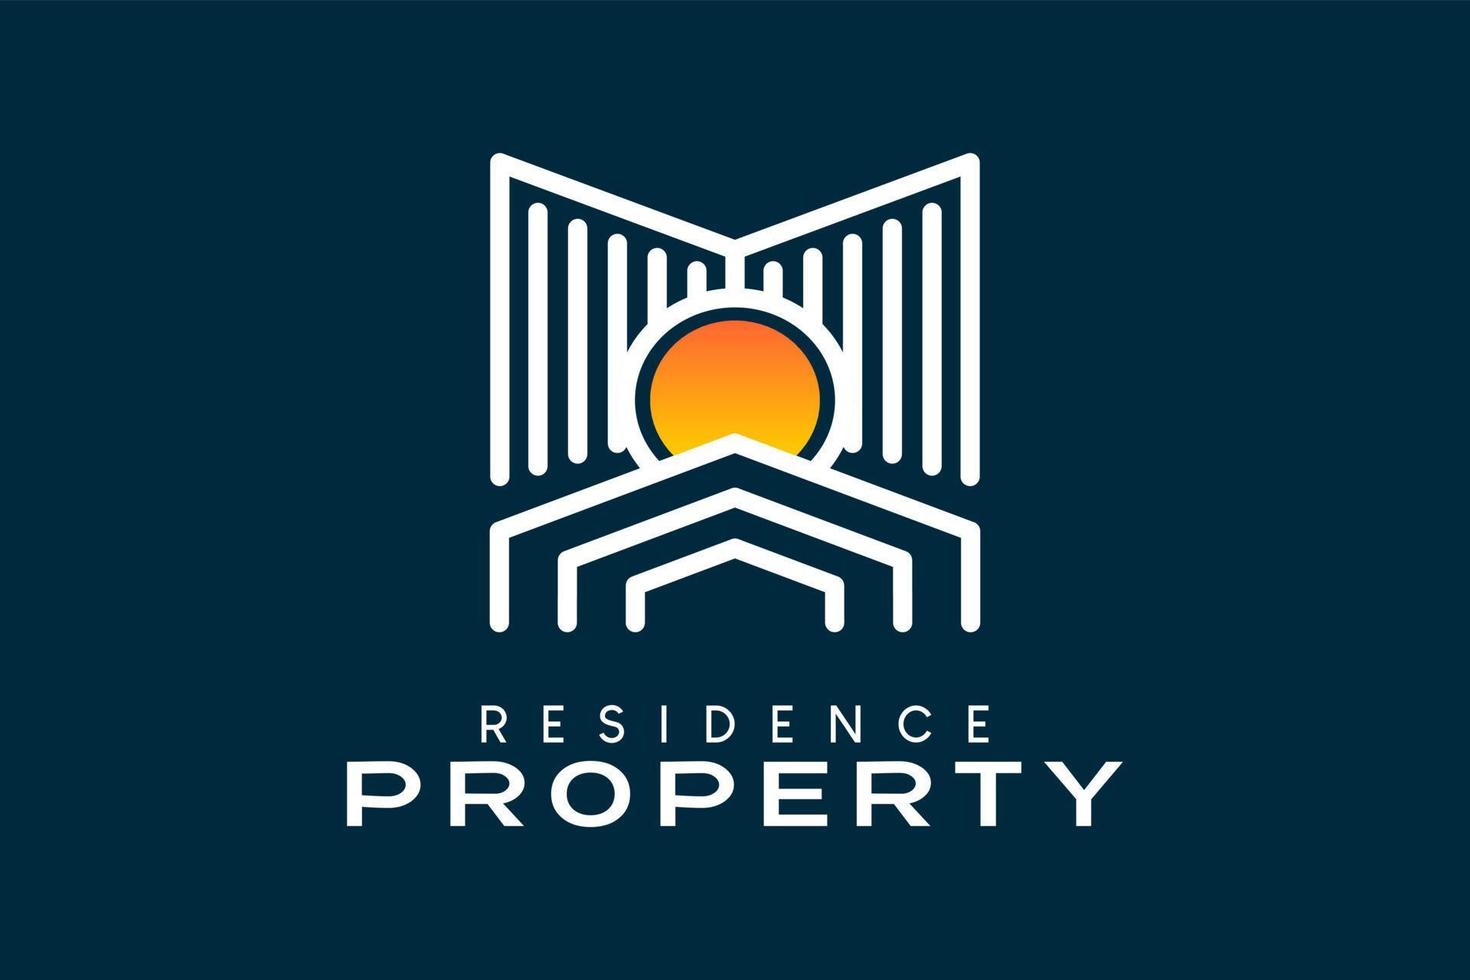 Property logo with building, house and sun icons in a creative concept, logo for residential properties vector